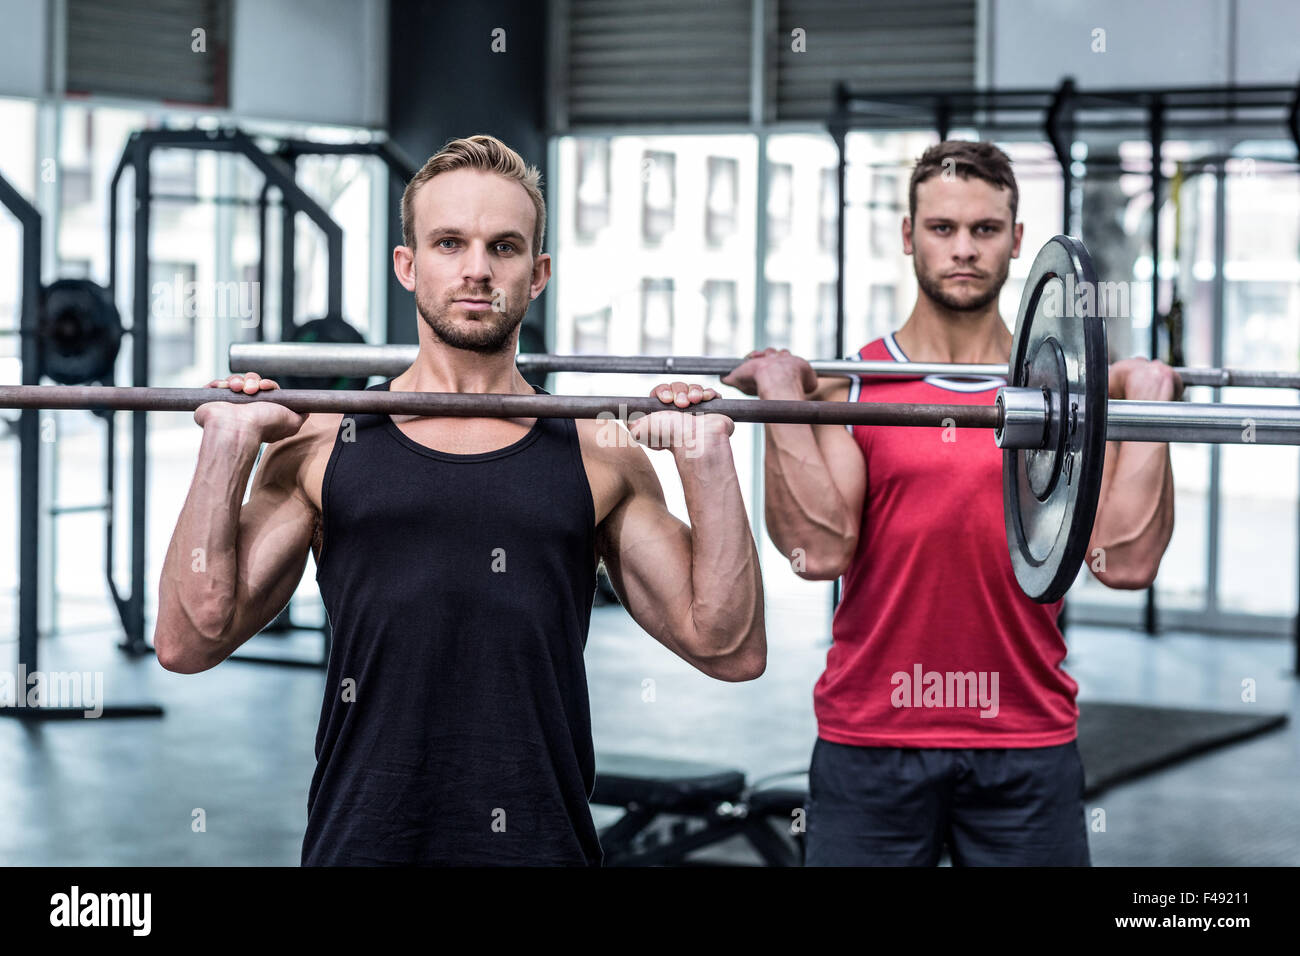 Muscular Men Lifting A Barbell Stock Photo Alamy